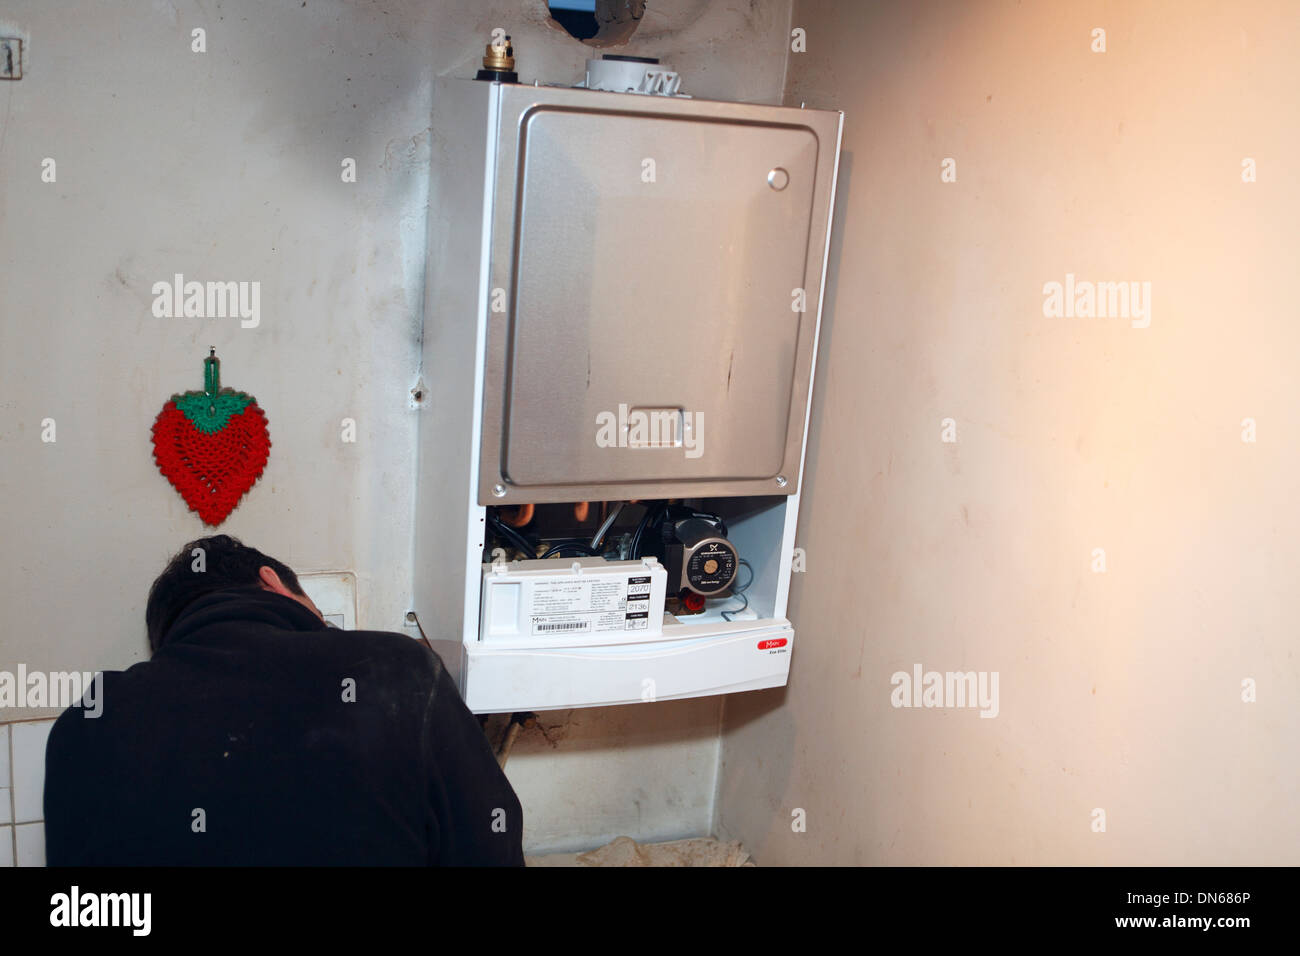 united kingdom london a plumber installing a combination gas boiler Stock Photo